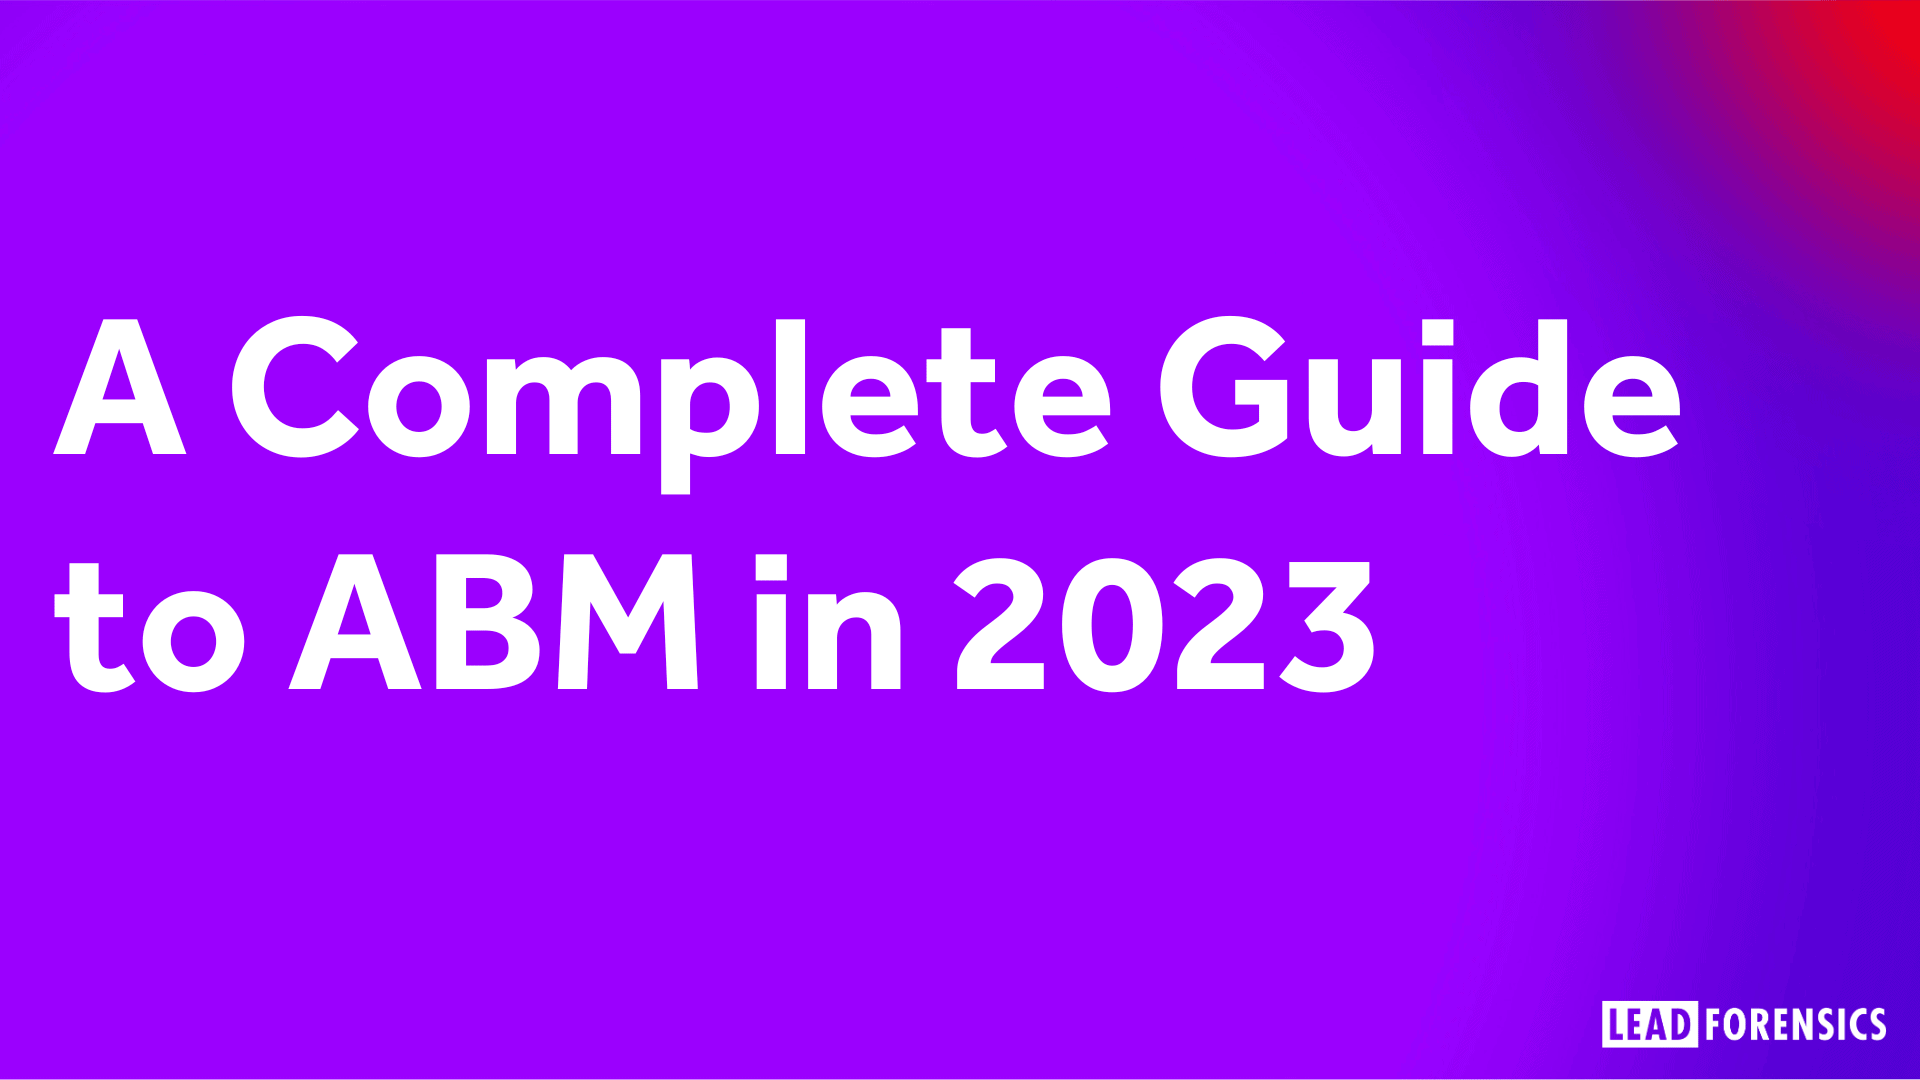 A Complete Guide to ABM in 2023